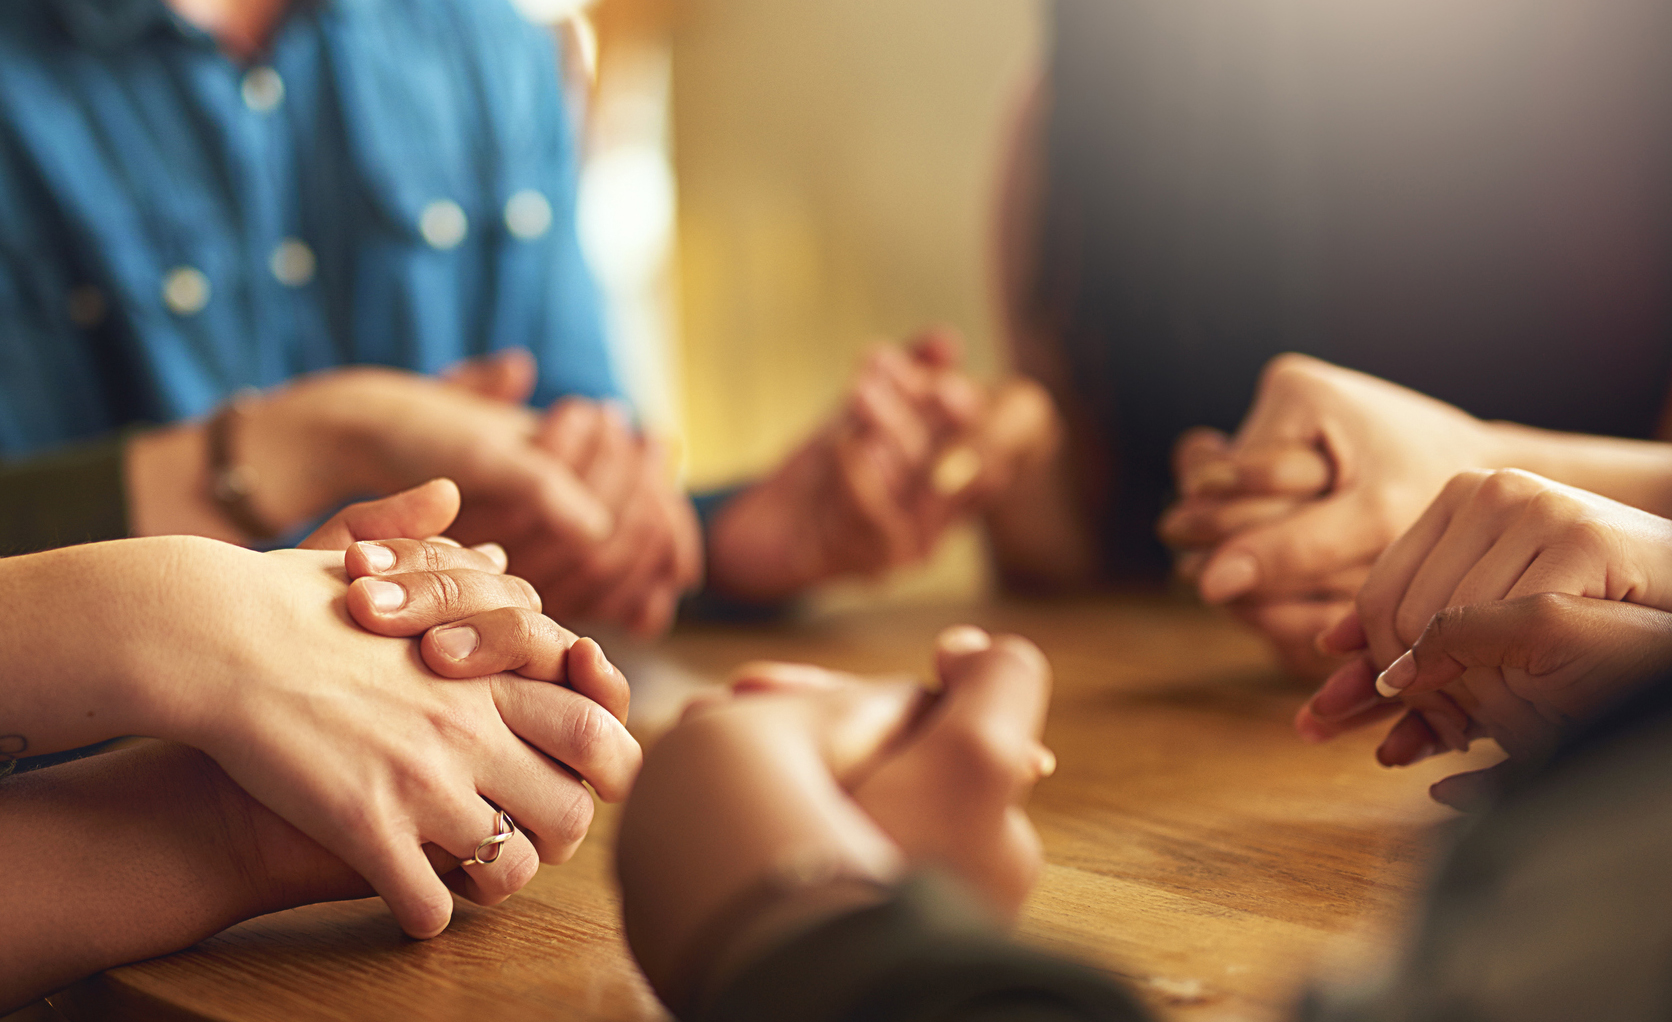 A picture of people holding hands together at a table in faith.